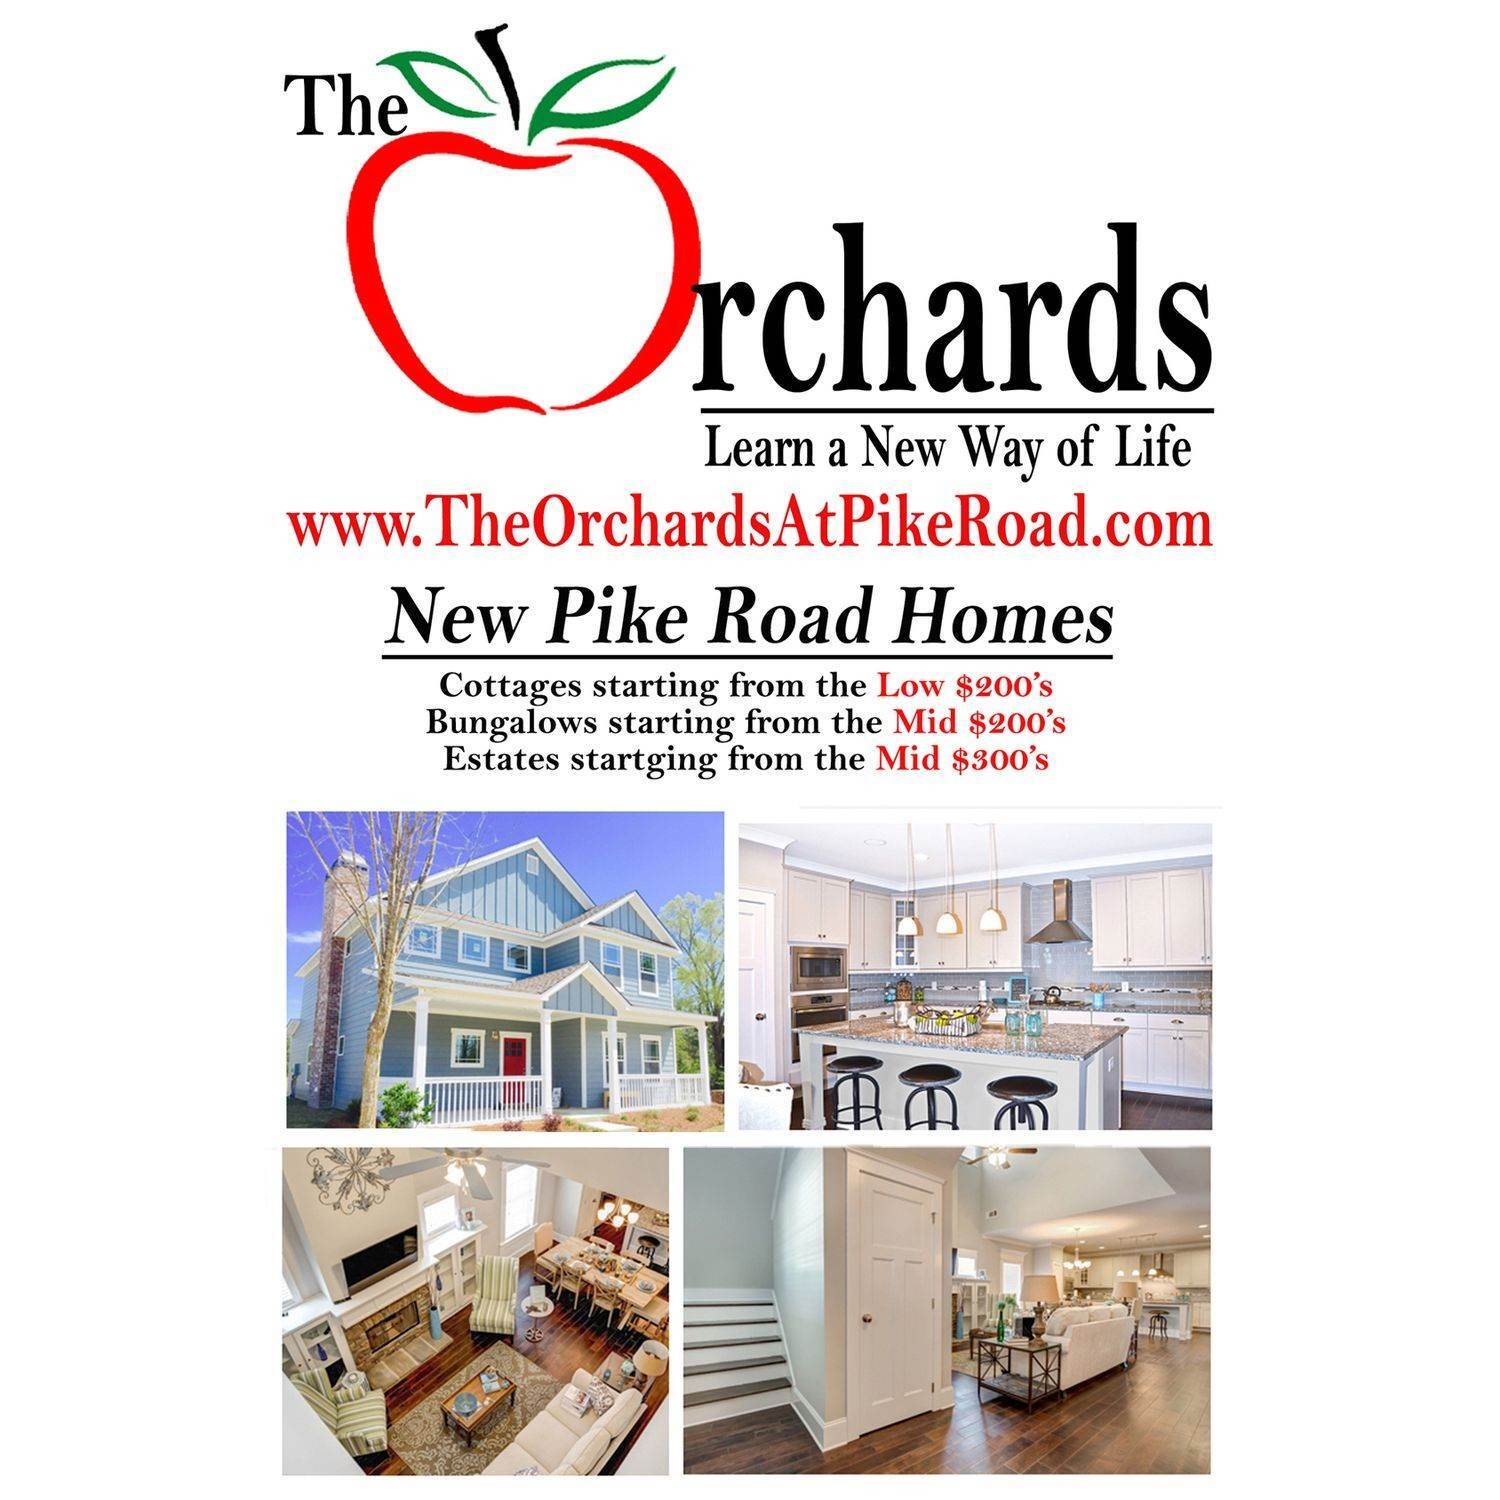 The Orchards at Pike Road byggnad vid 130 Avenue Of Learning, Pike Road, AL 36064